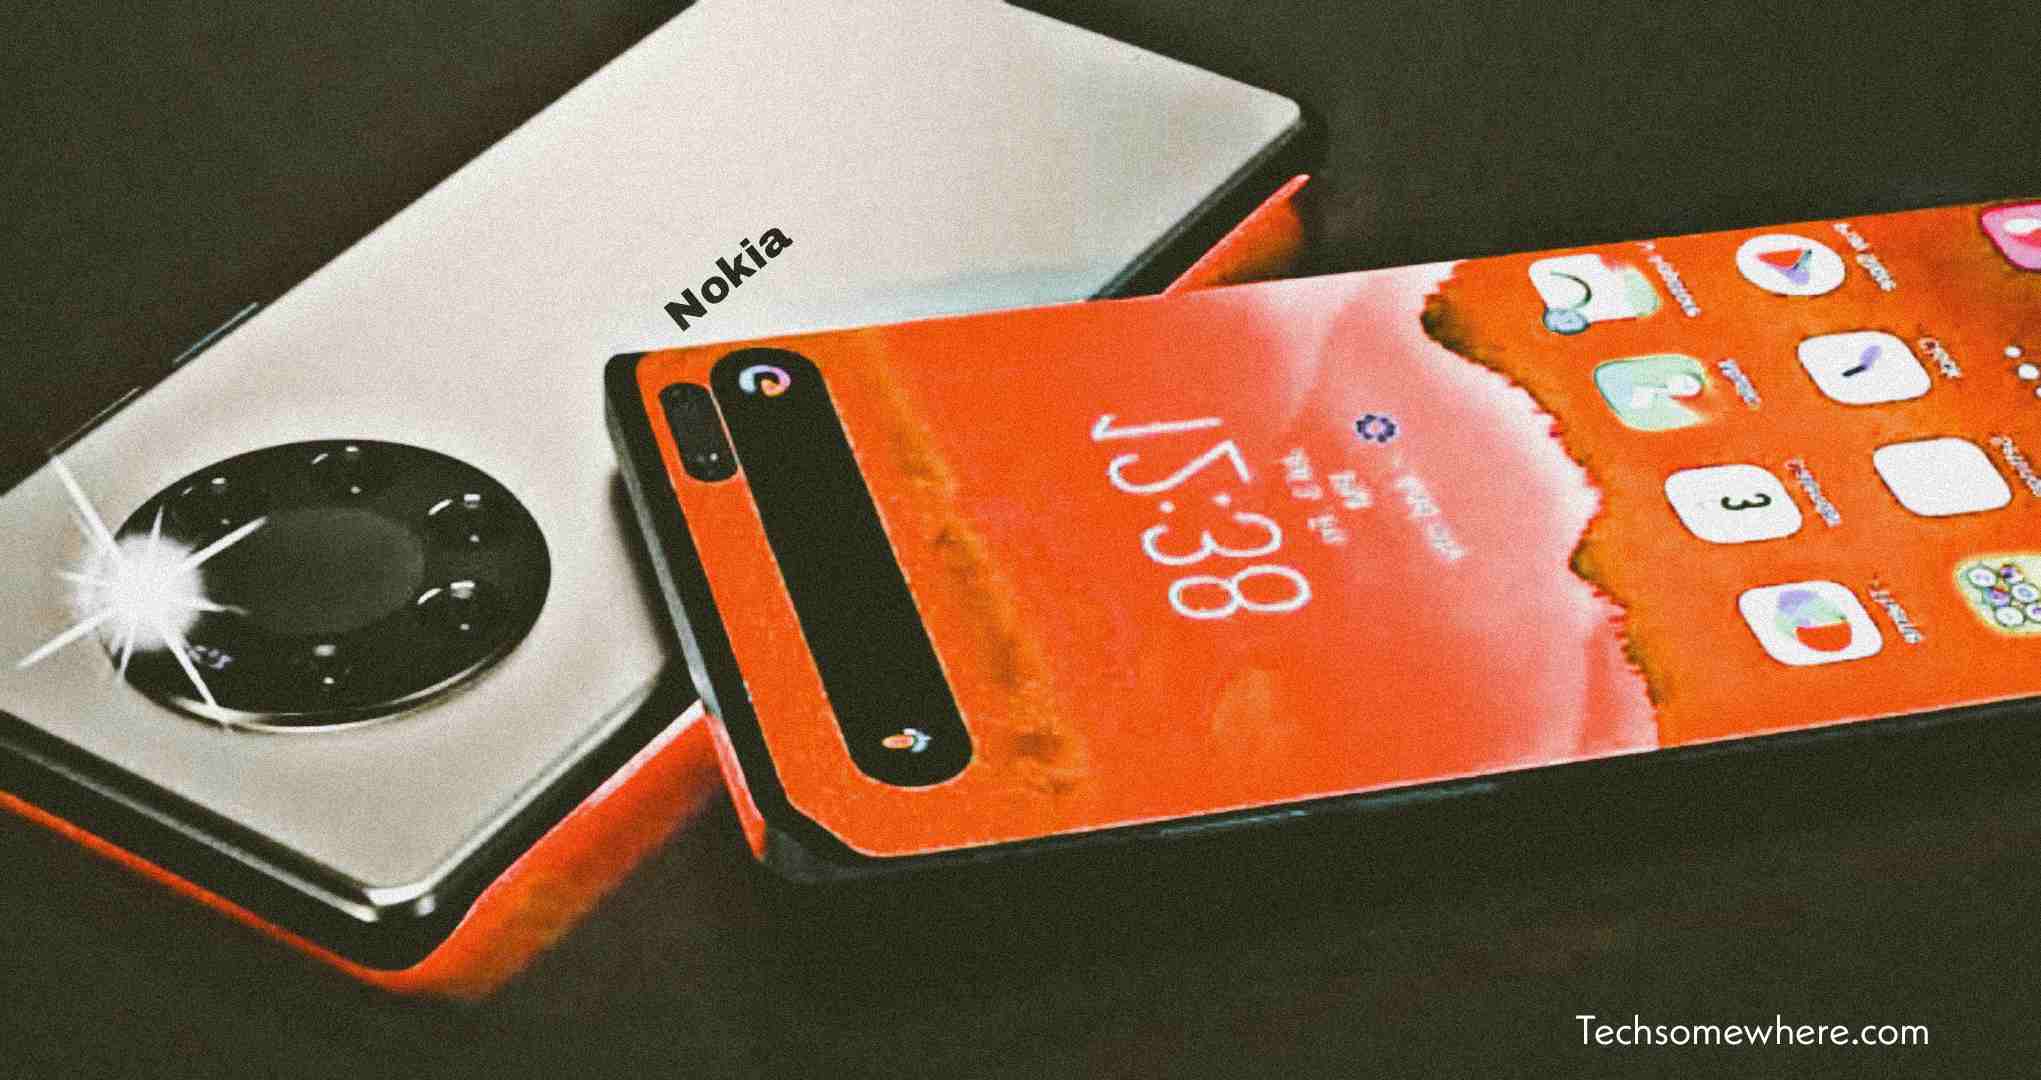 Nokia R21 Max - First Look, Specs, Price, Leaked Rumours & Release Date - Techsomewhere